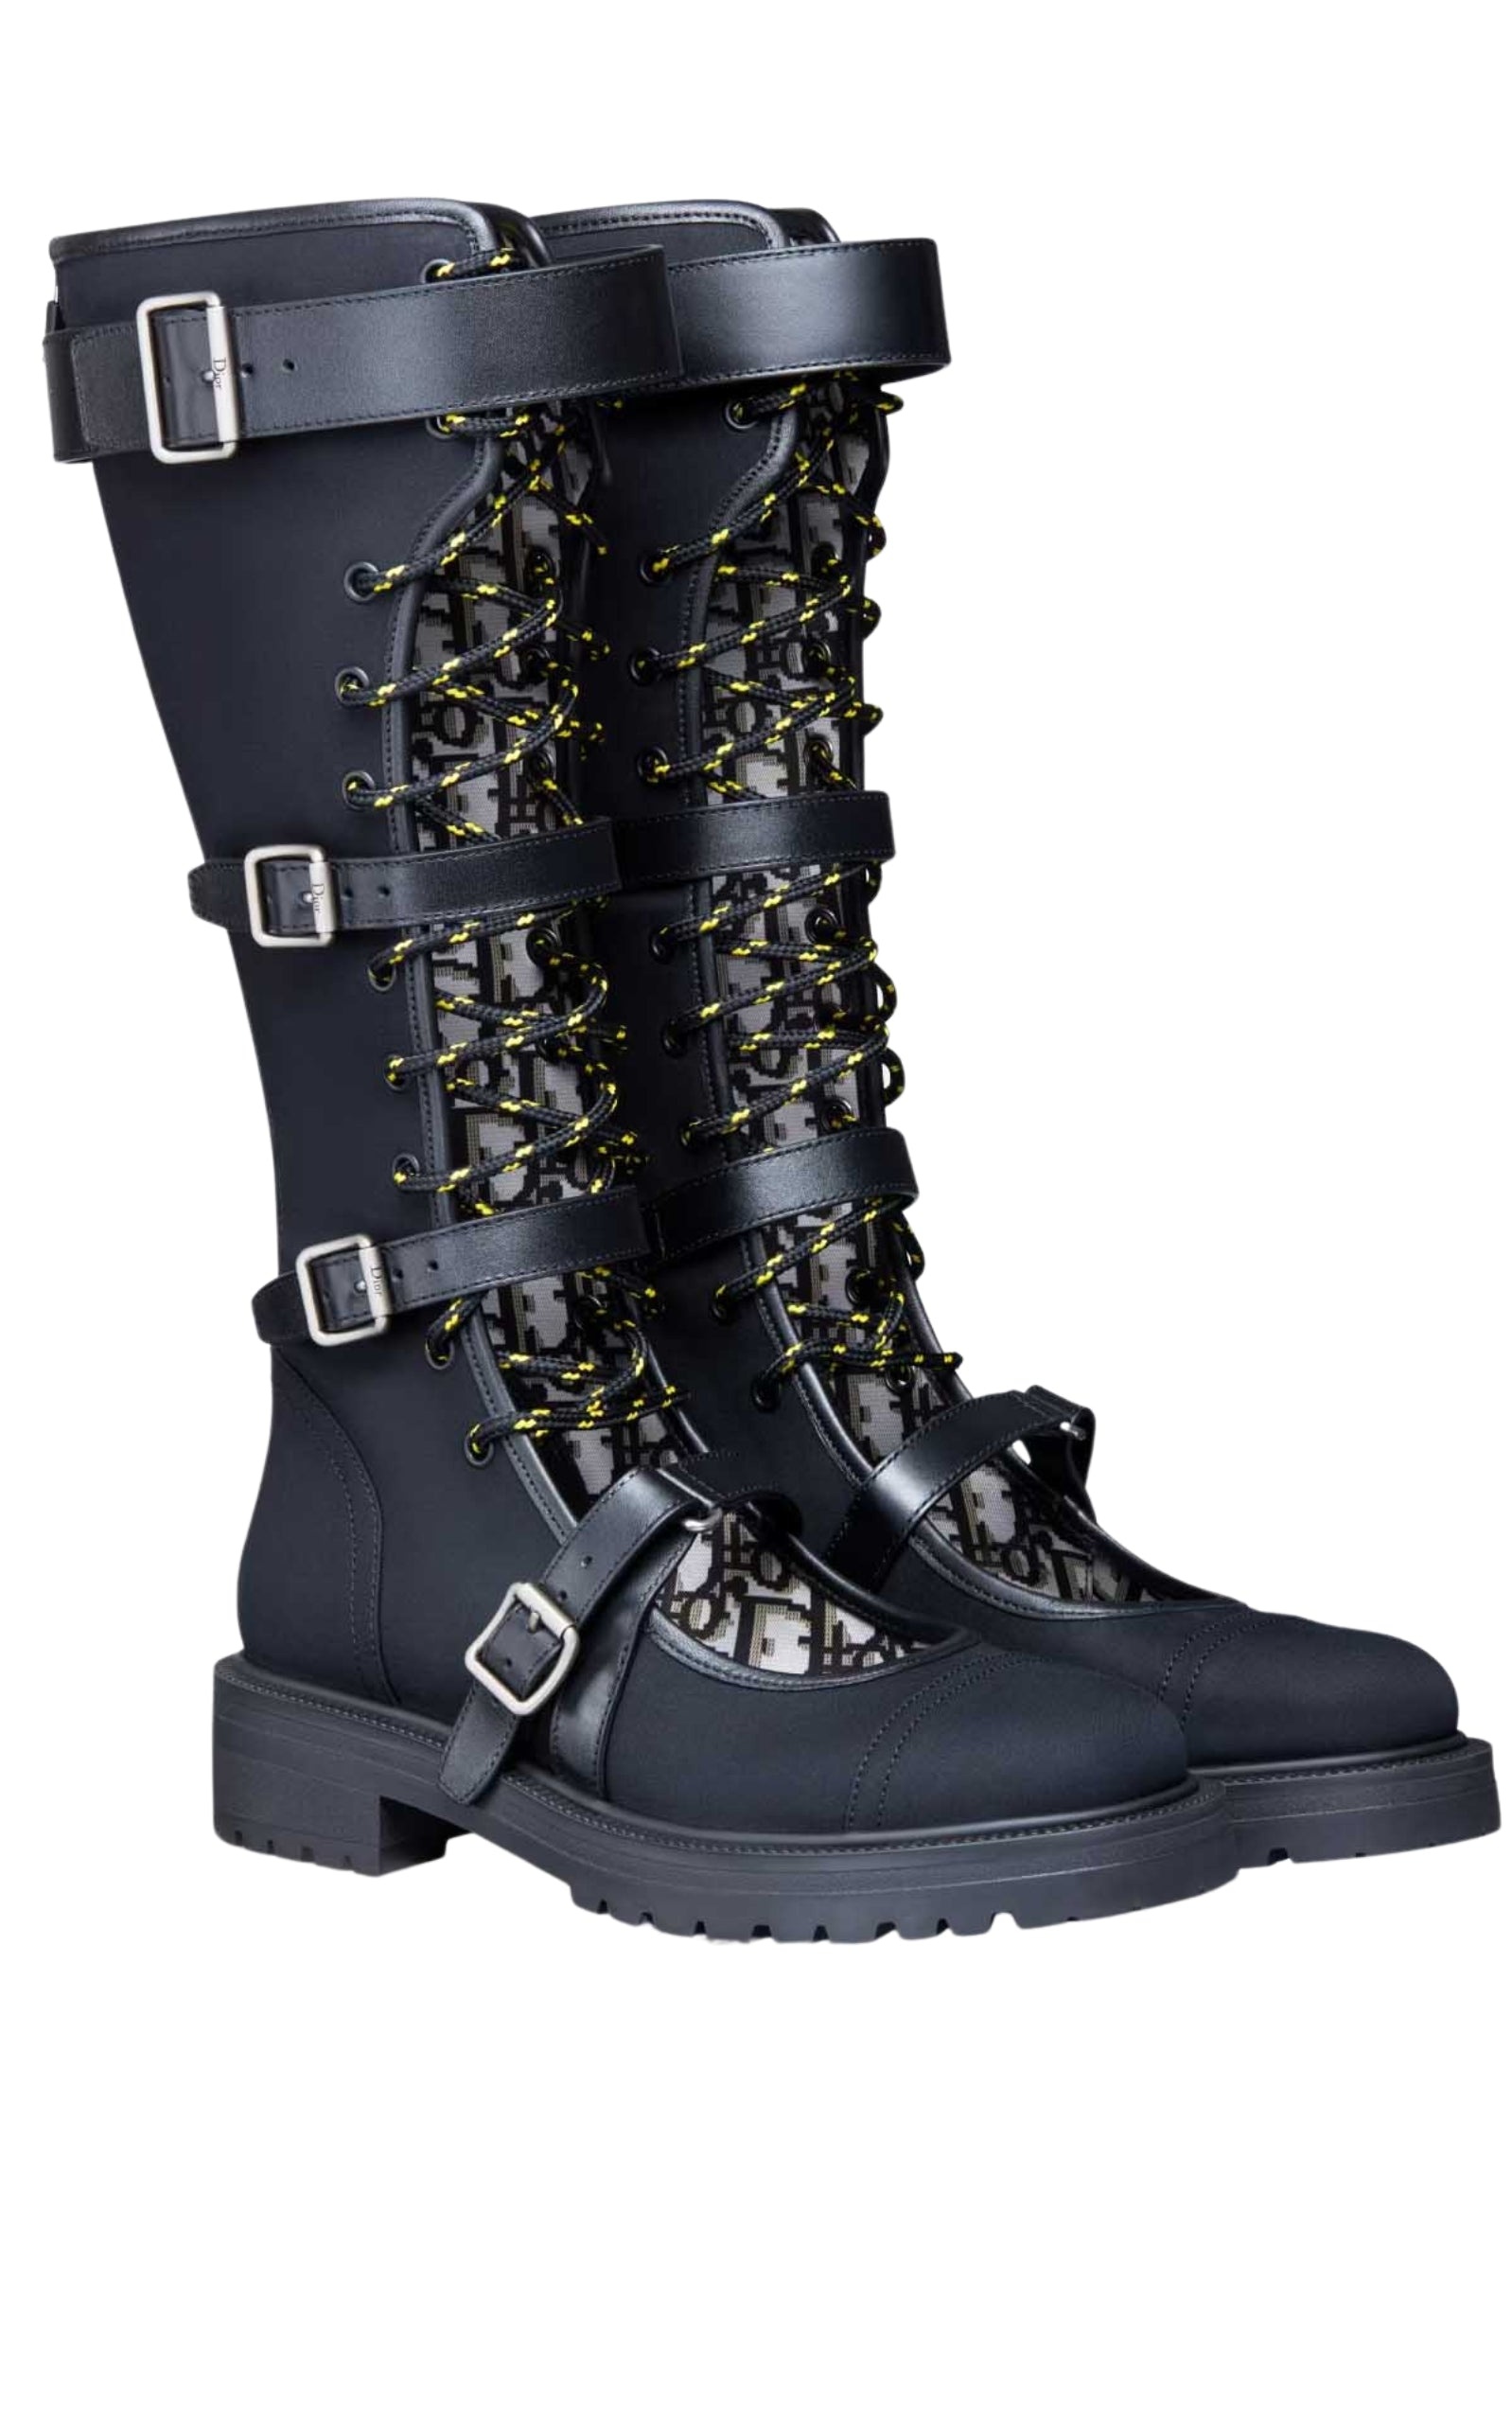 Dioranger Boots in Black Technical Fabric - 4